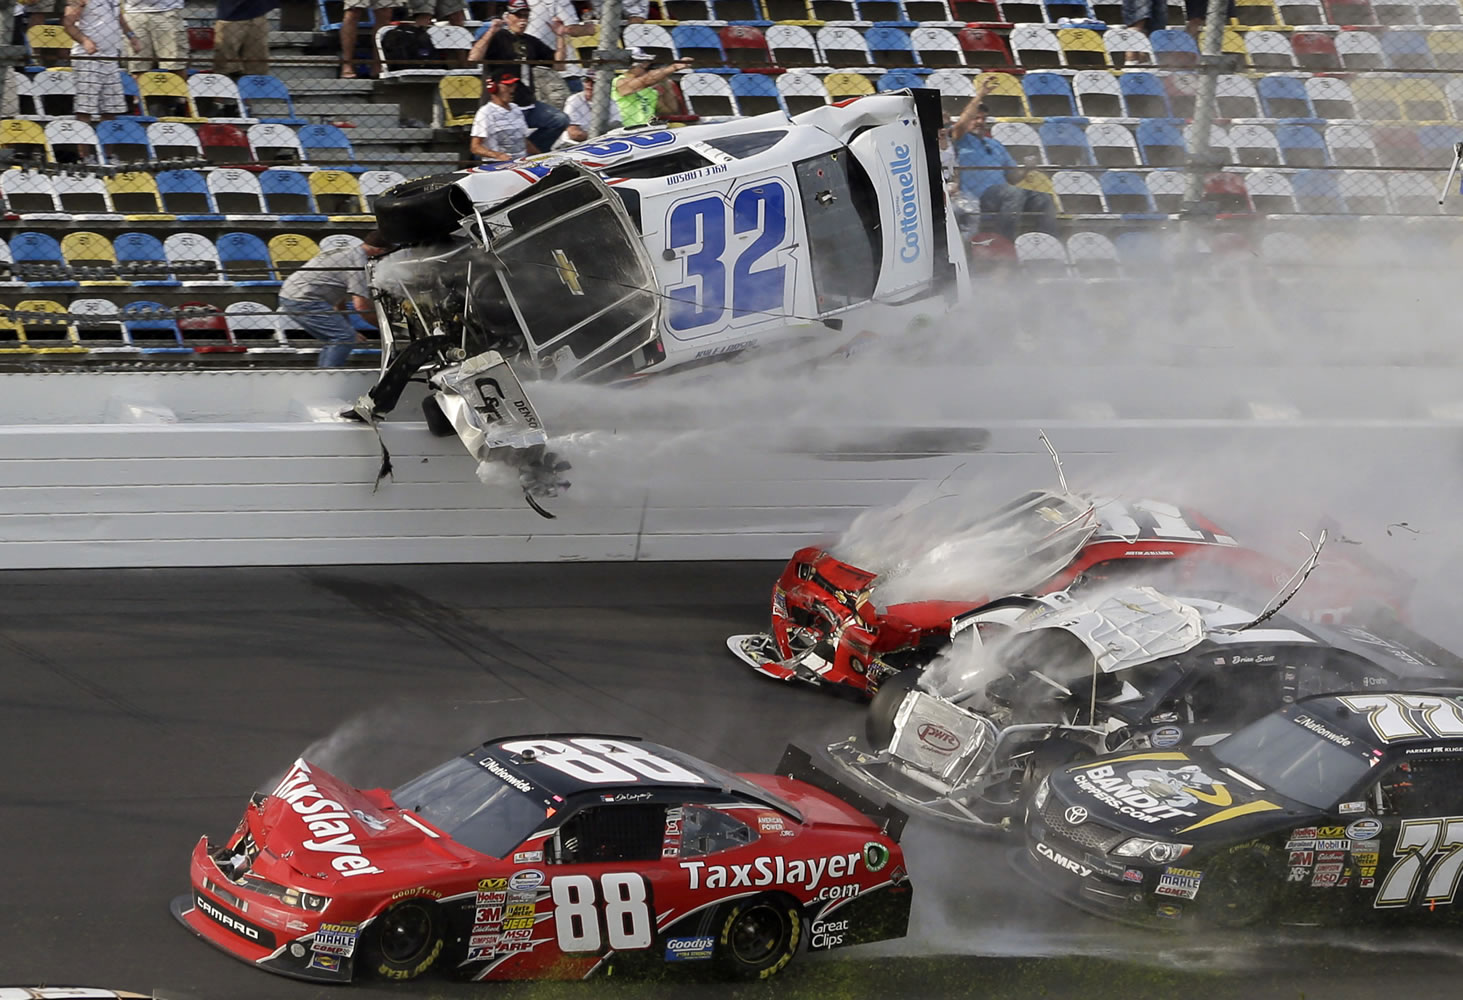 Kyle Larson (32) goes airborne and into the catch fence in a multi-car crash involving Dale Earnhardt Jr. (88), Parker Kilgerman (77), Justin Allgaier (31) and Brian Scott (2) during the final lap of the NASCAR Nationwide Series auto race at Daytona International Speedway, Saturday, Feb.